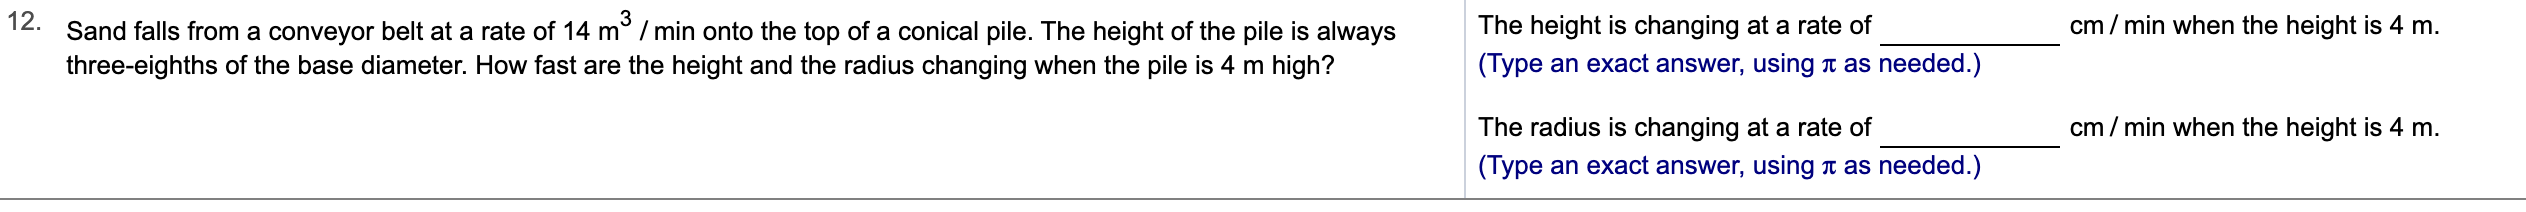 12.
Sand falls from a conveyor belt at a rate of 14 m2 /min onto the top of a conical pile. The height of the pile is always
cm min when the height is 4 m
The height is changing at a rate of
(Type an exact answer, using t as needed.)
three-eighths of the base diameter. How fast are the height and the radius changing when the pile is 4 m high?
cm/min when the height is 4 m.
The radius is changing at a rate of
(Type an exact answer, using
as needed.)
